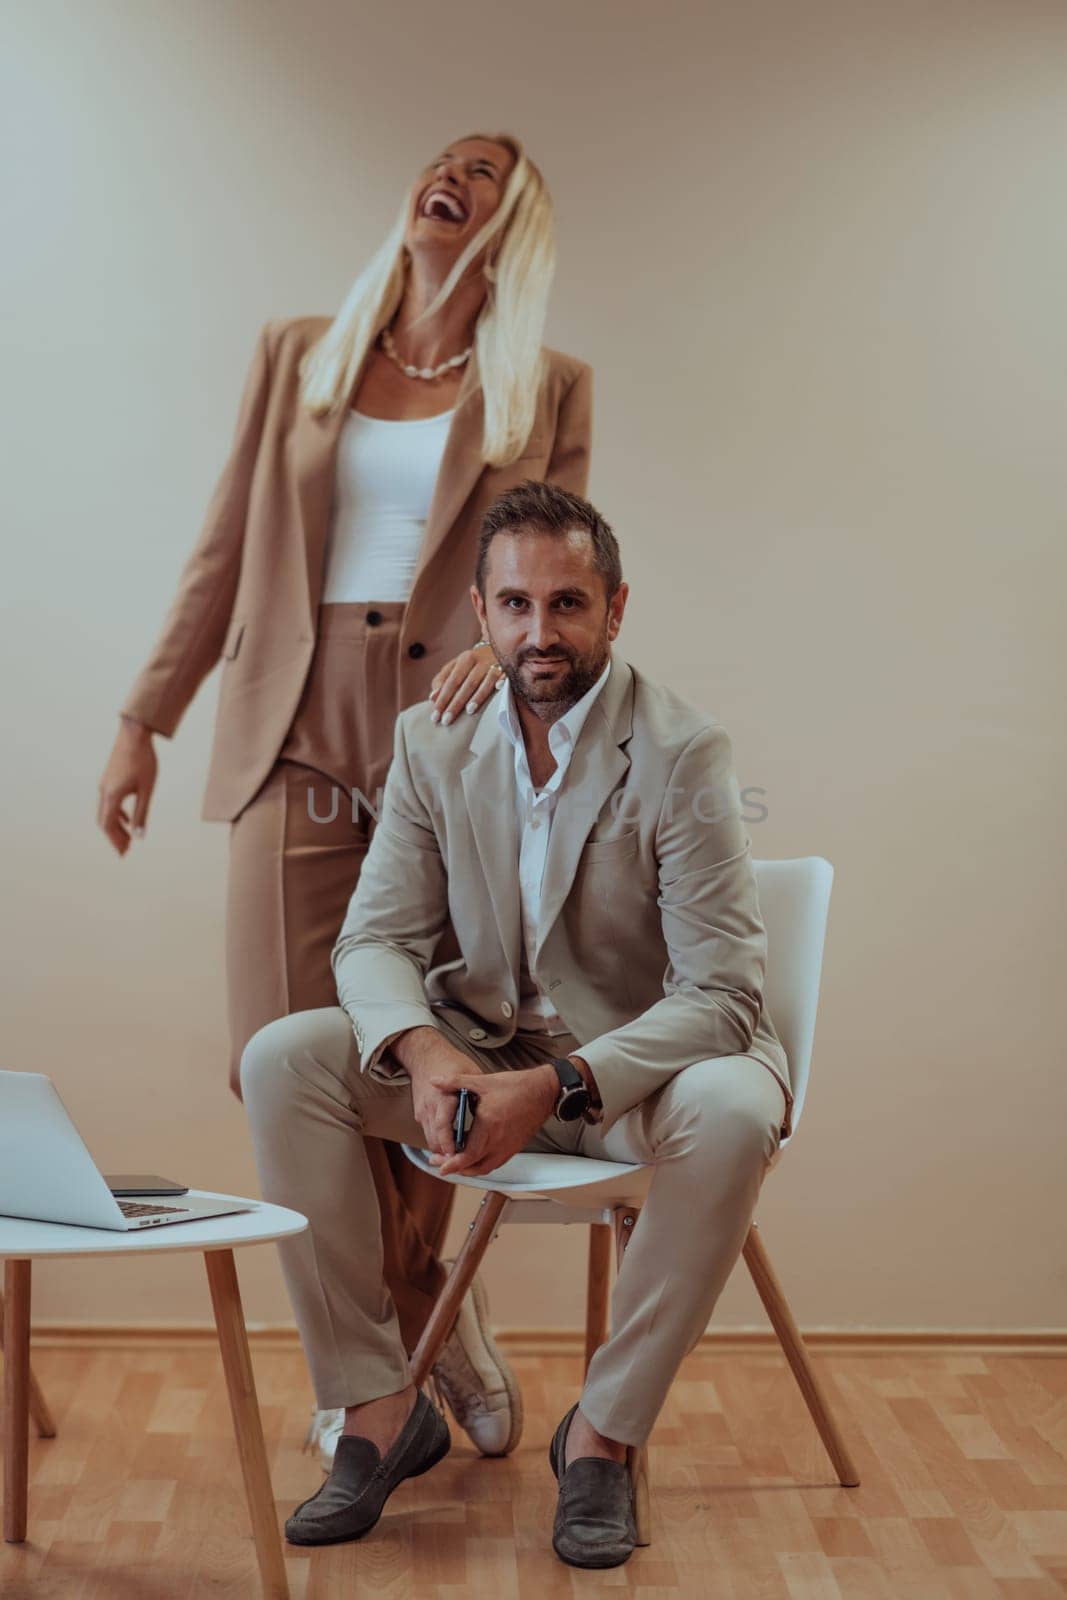 A business couple posing for a photograph together against a beige backdrop, capturing their professional partnership and creating a timeless image of unity and success. by dotshock